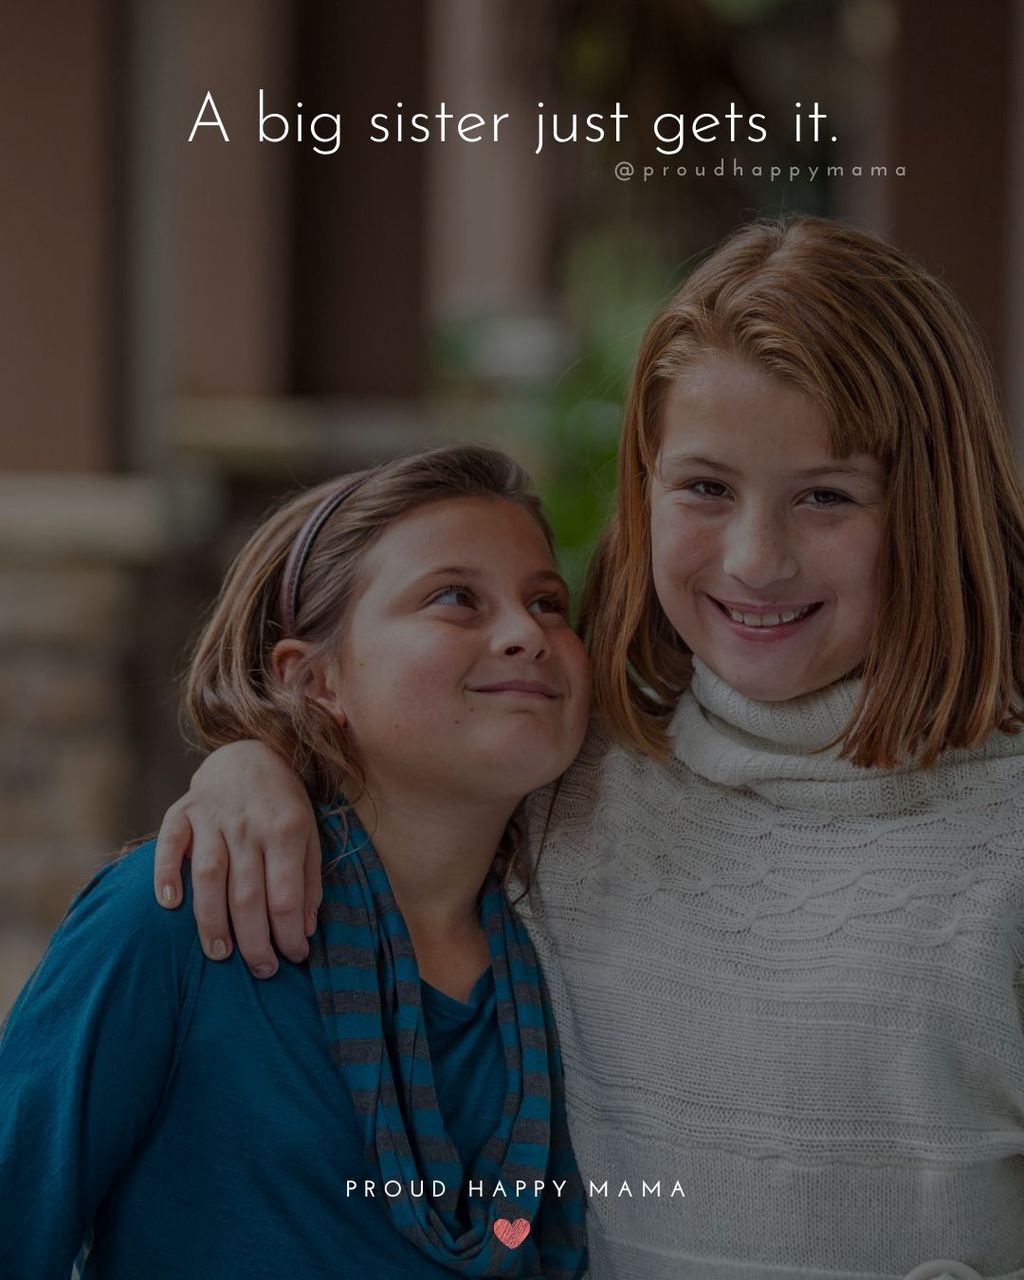 Sister Quotes - A big sister just gets it.